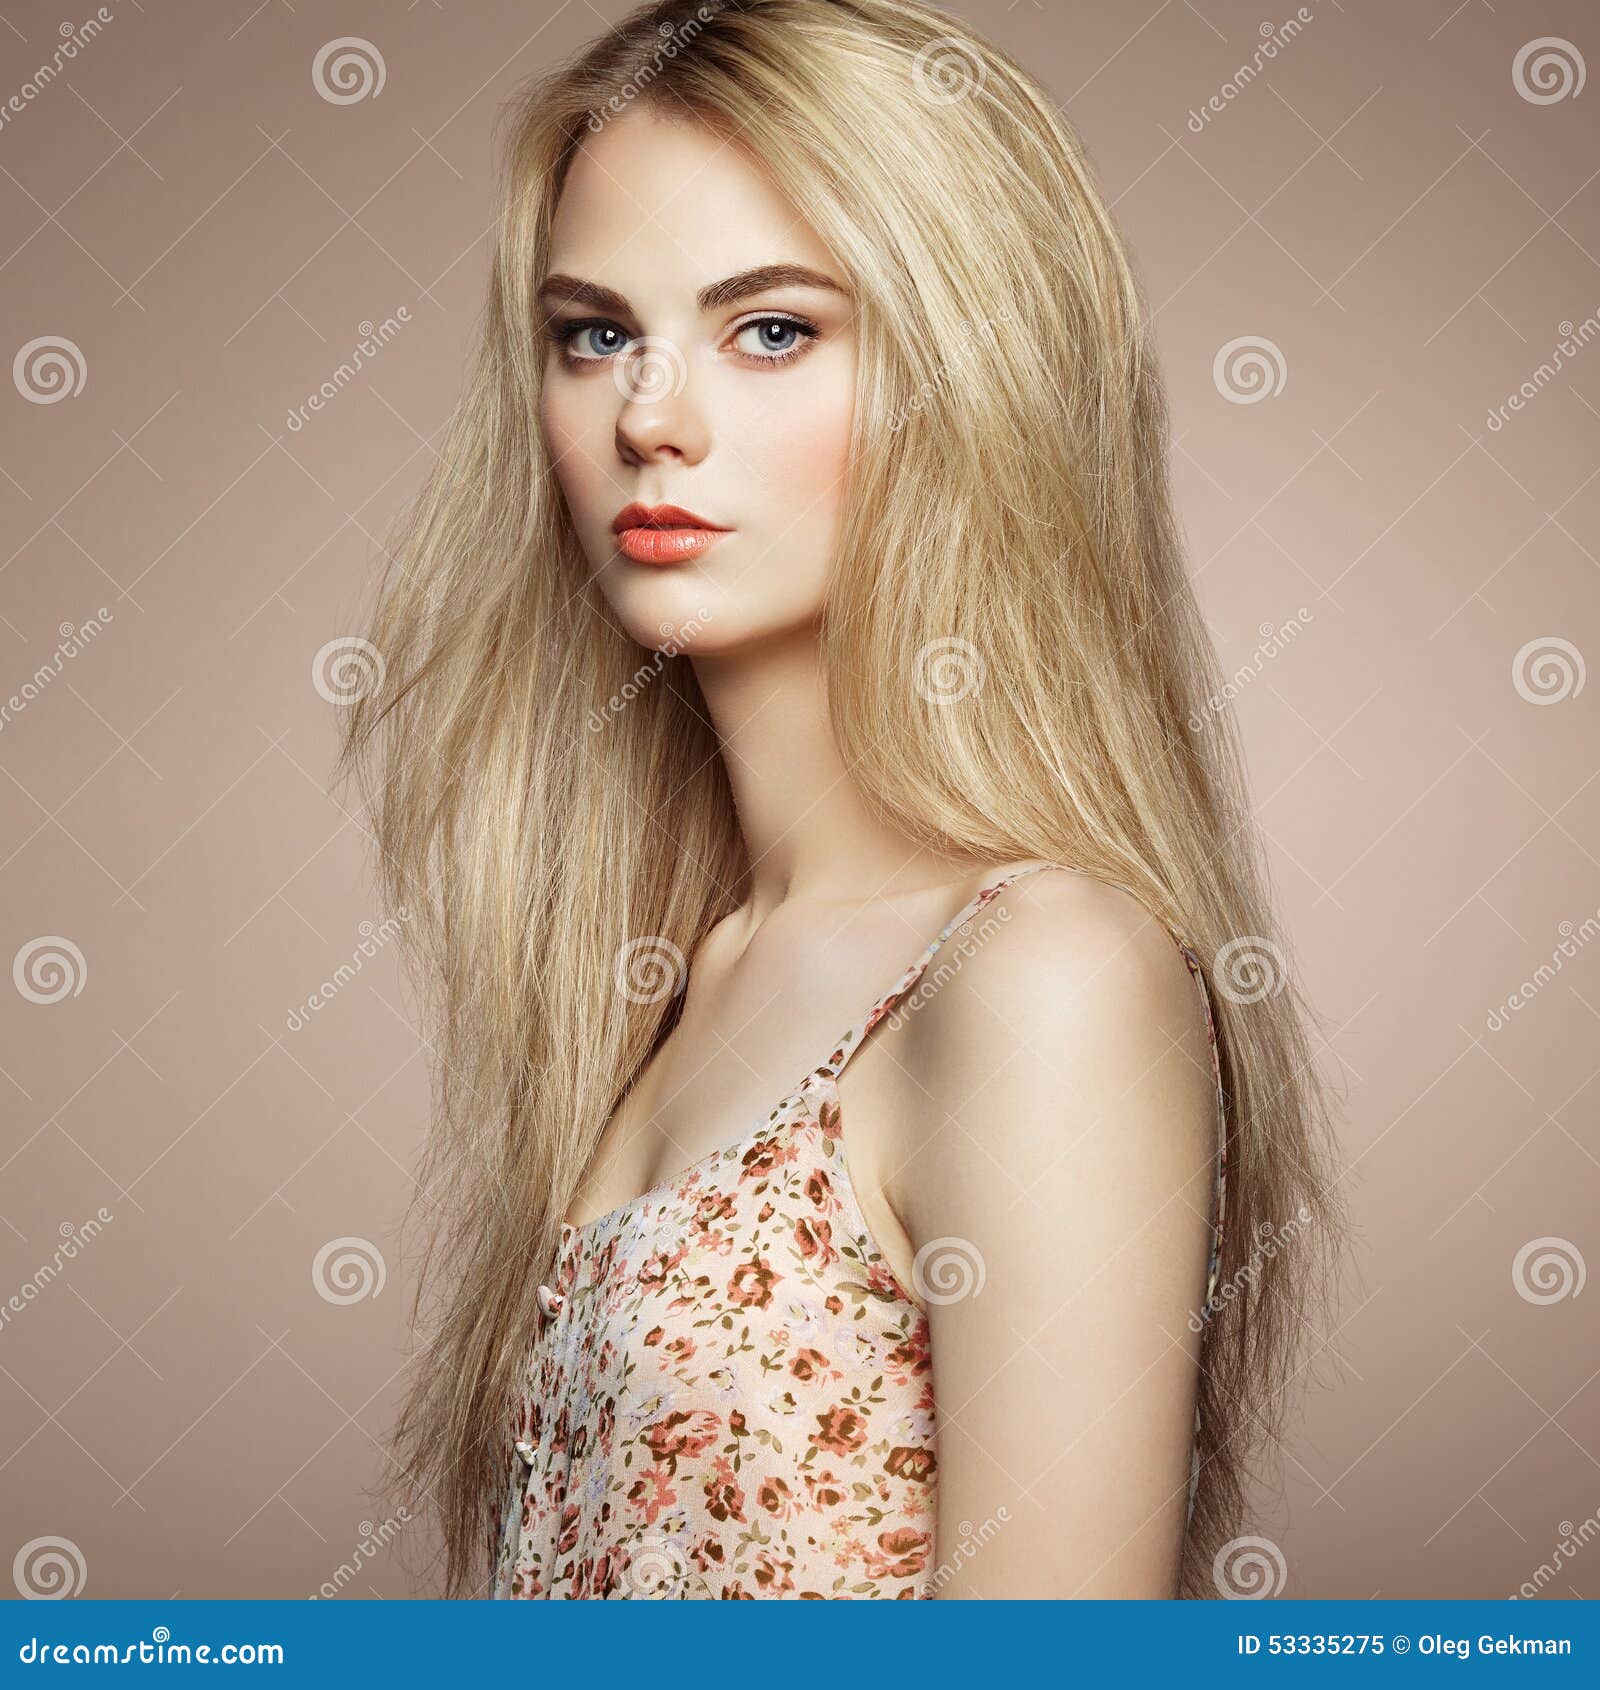 fashion portrait of elegant woman with magnificent hair